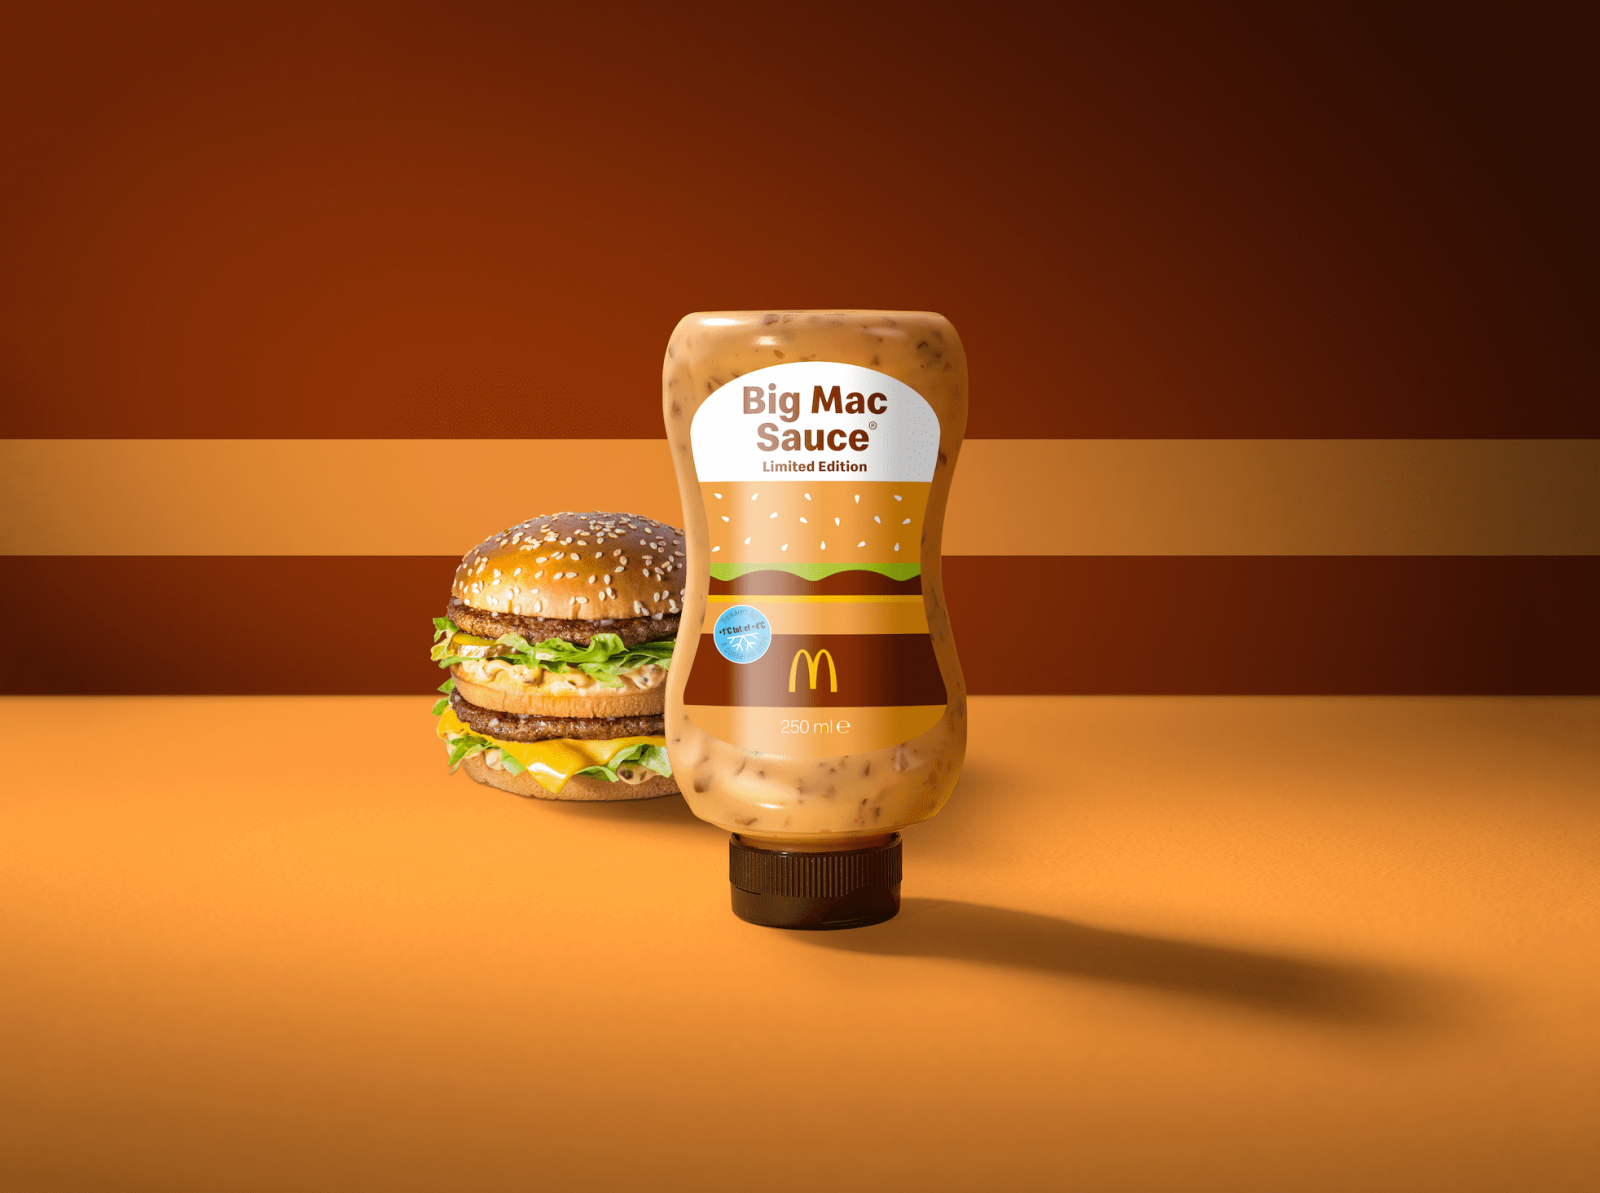 McDonald’s is releasing a limited edition bottled Big Mac sauce